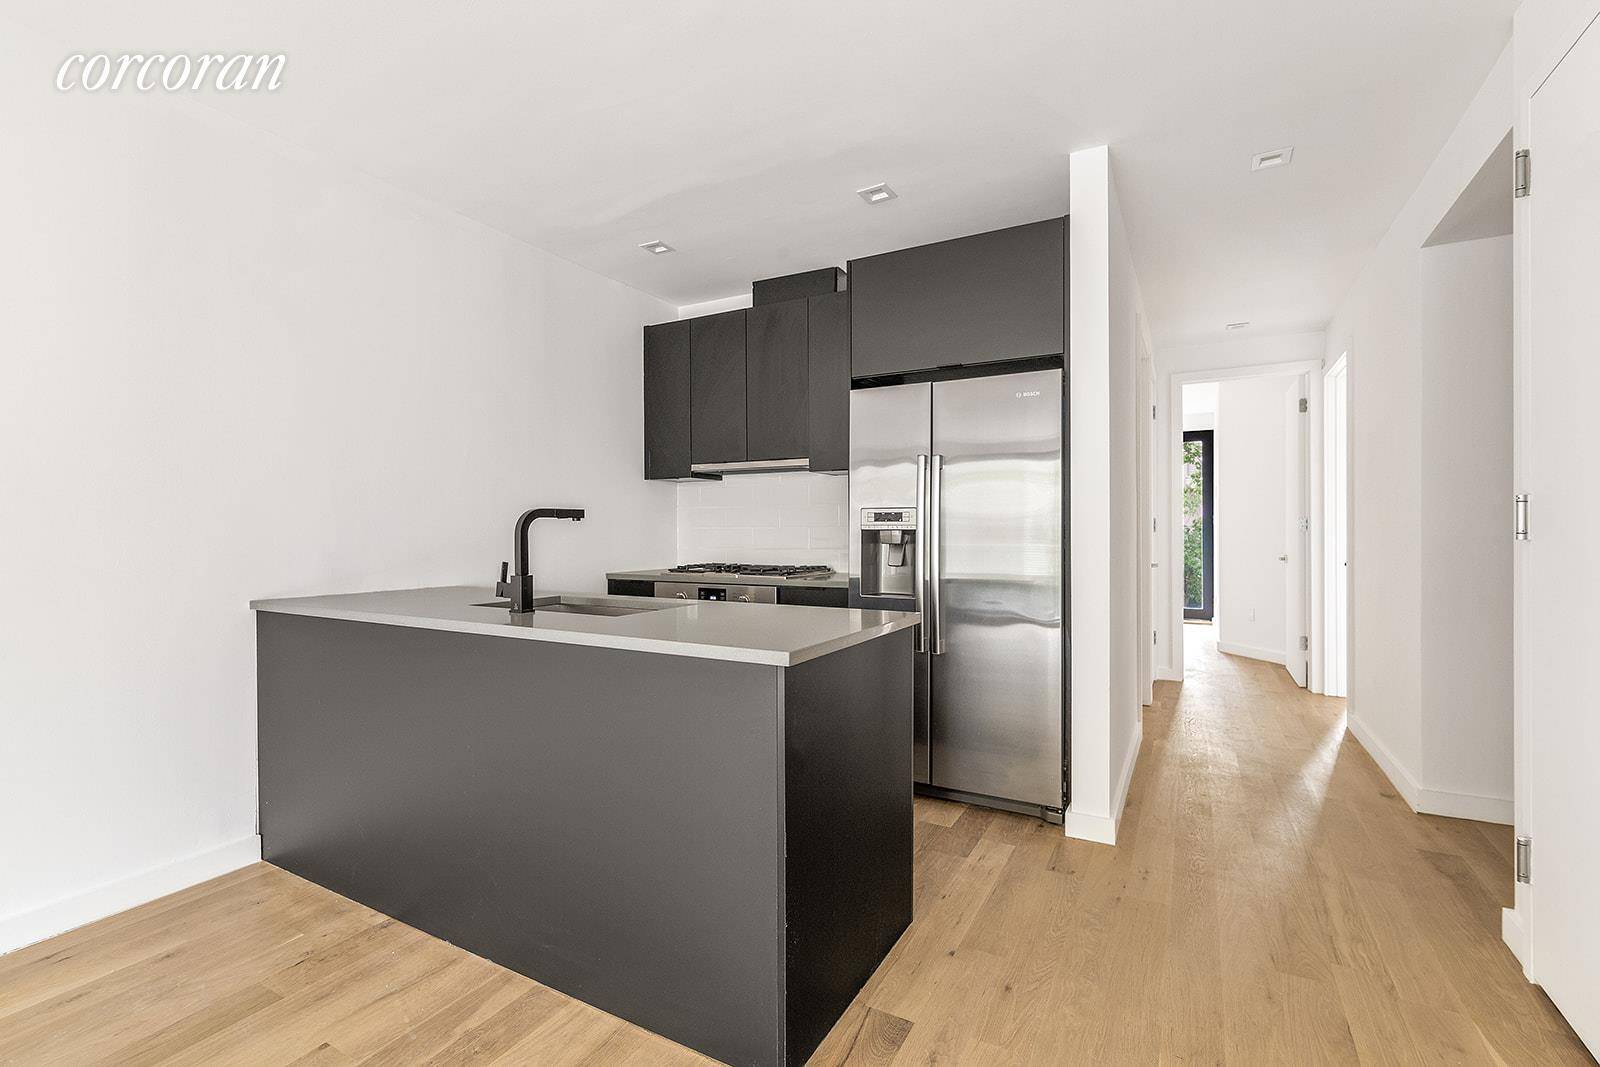 Unit 2 offers three bedrooms and two full baths with an expansive living and dining space, tons of natural light with Southern and Northern exposures and two balconies.